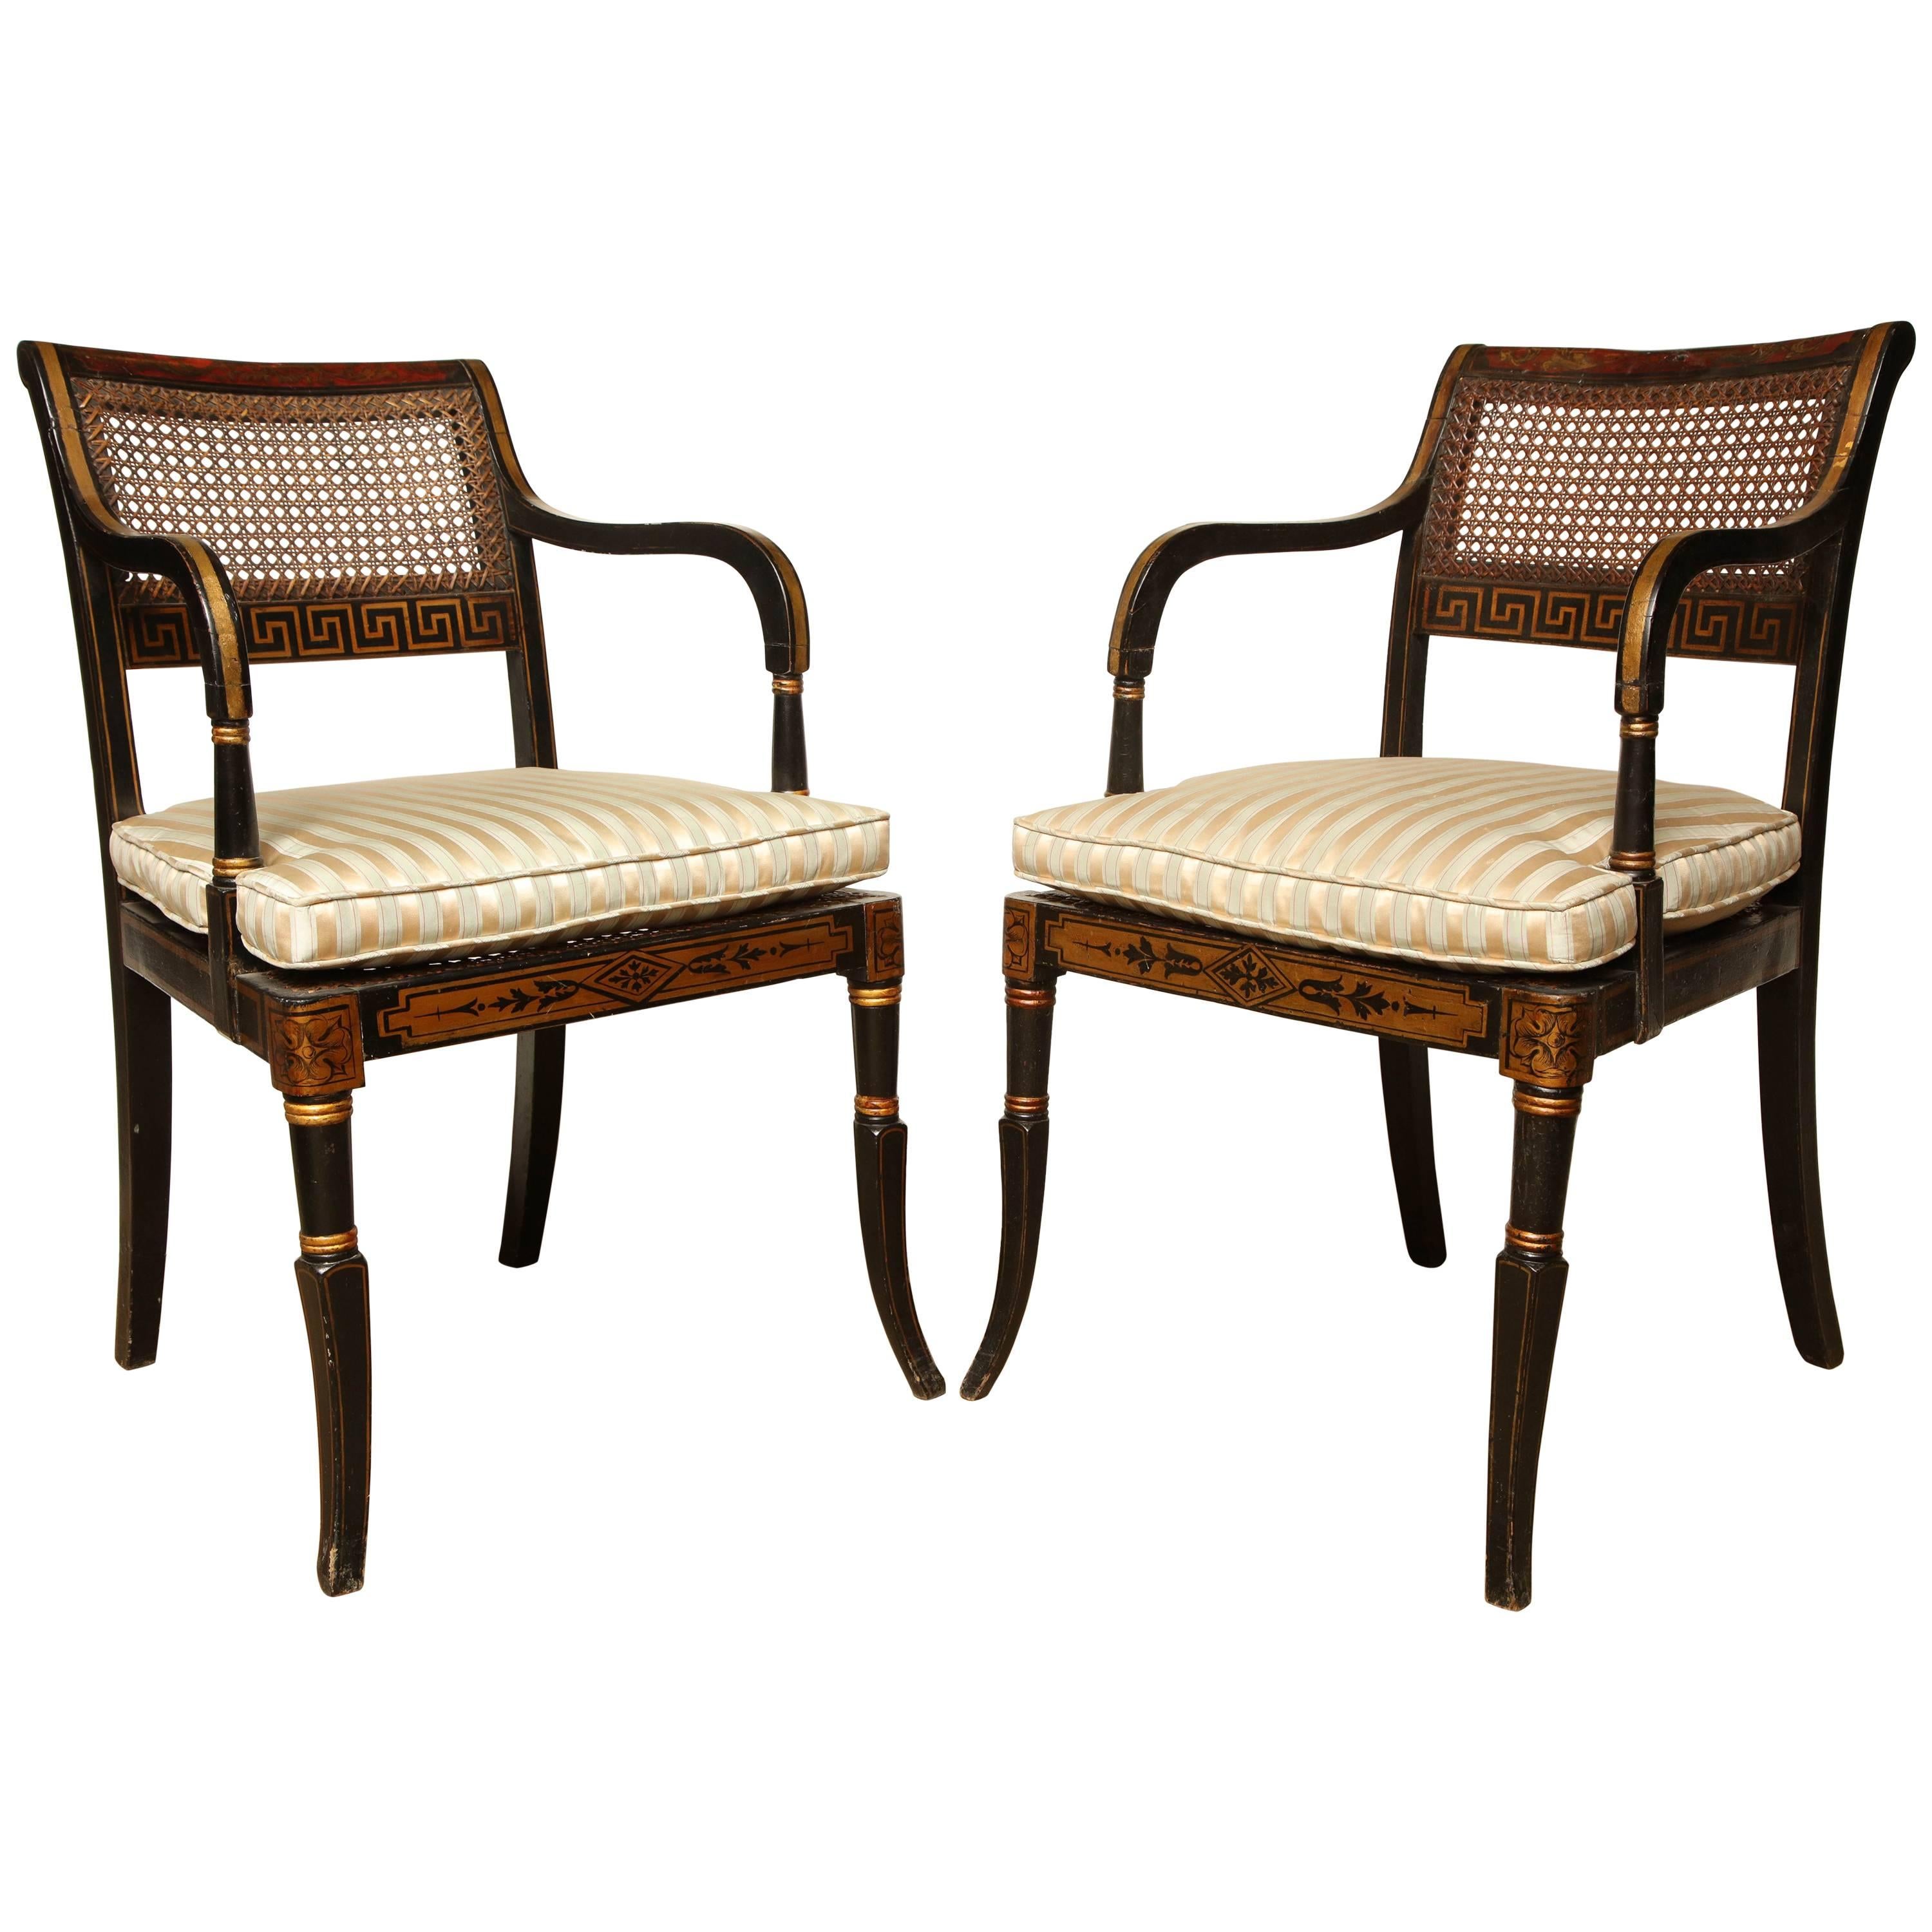 Pair of English Regency Neoclassical Caned Armchairs